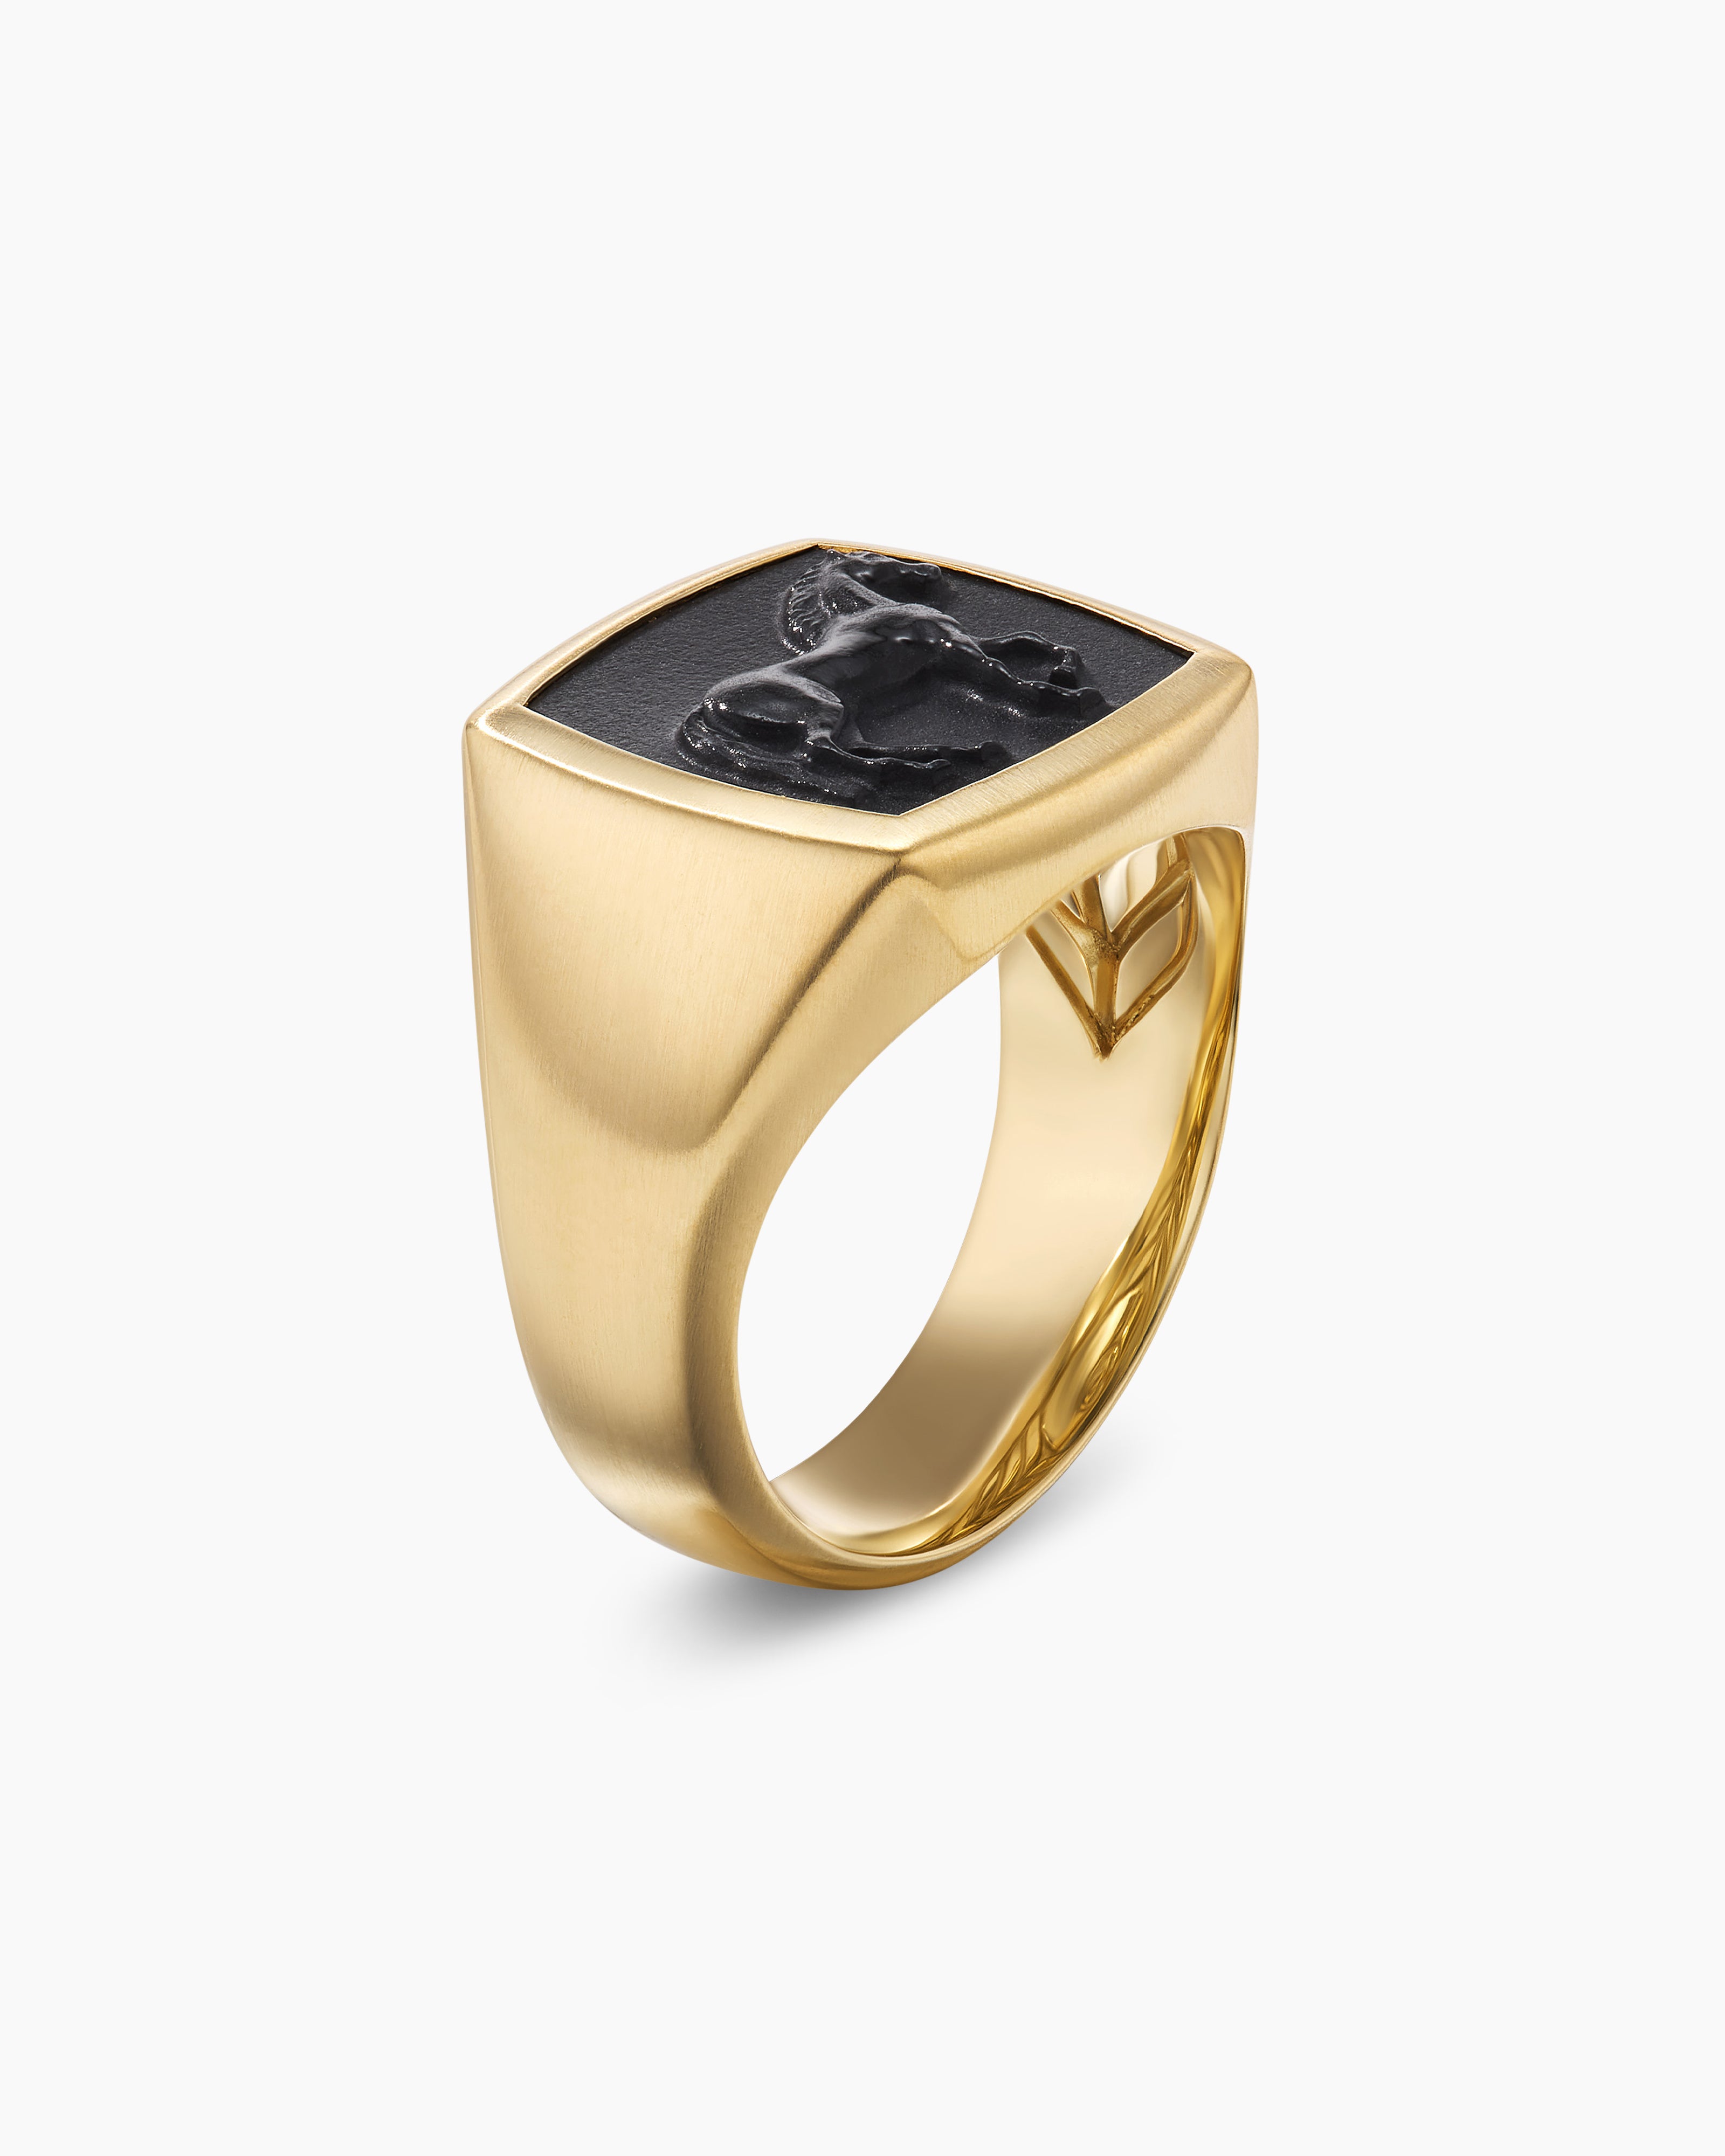 Petrvs® Horse Pinky Ring in 18K Yellow Gold with Black Onyx, 14.8mm